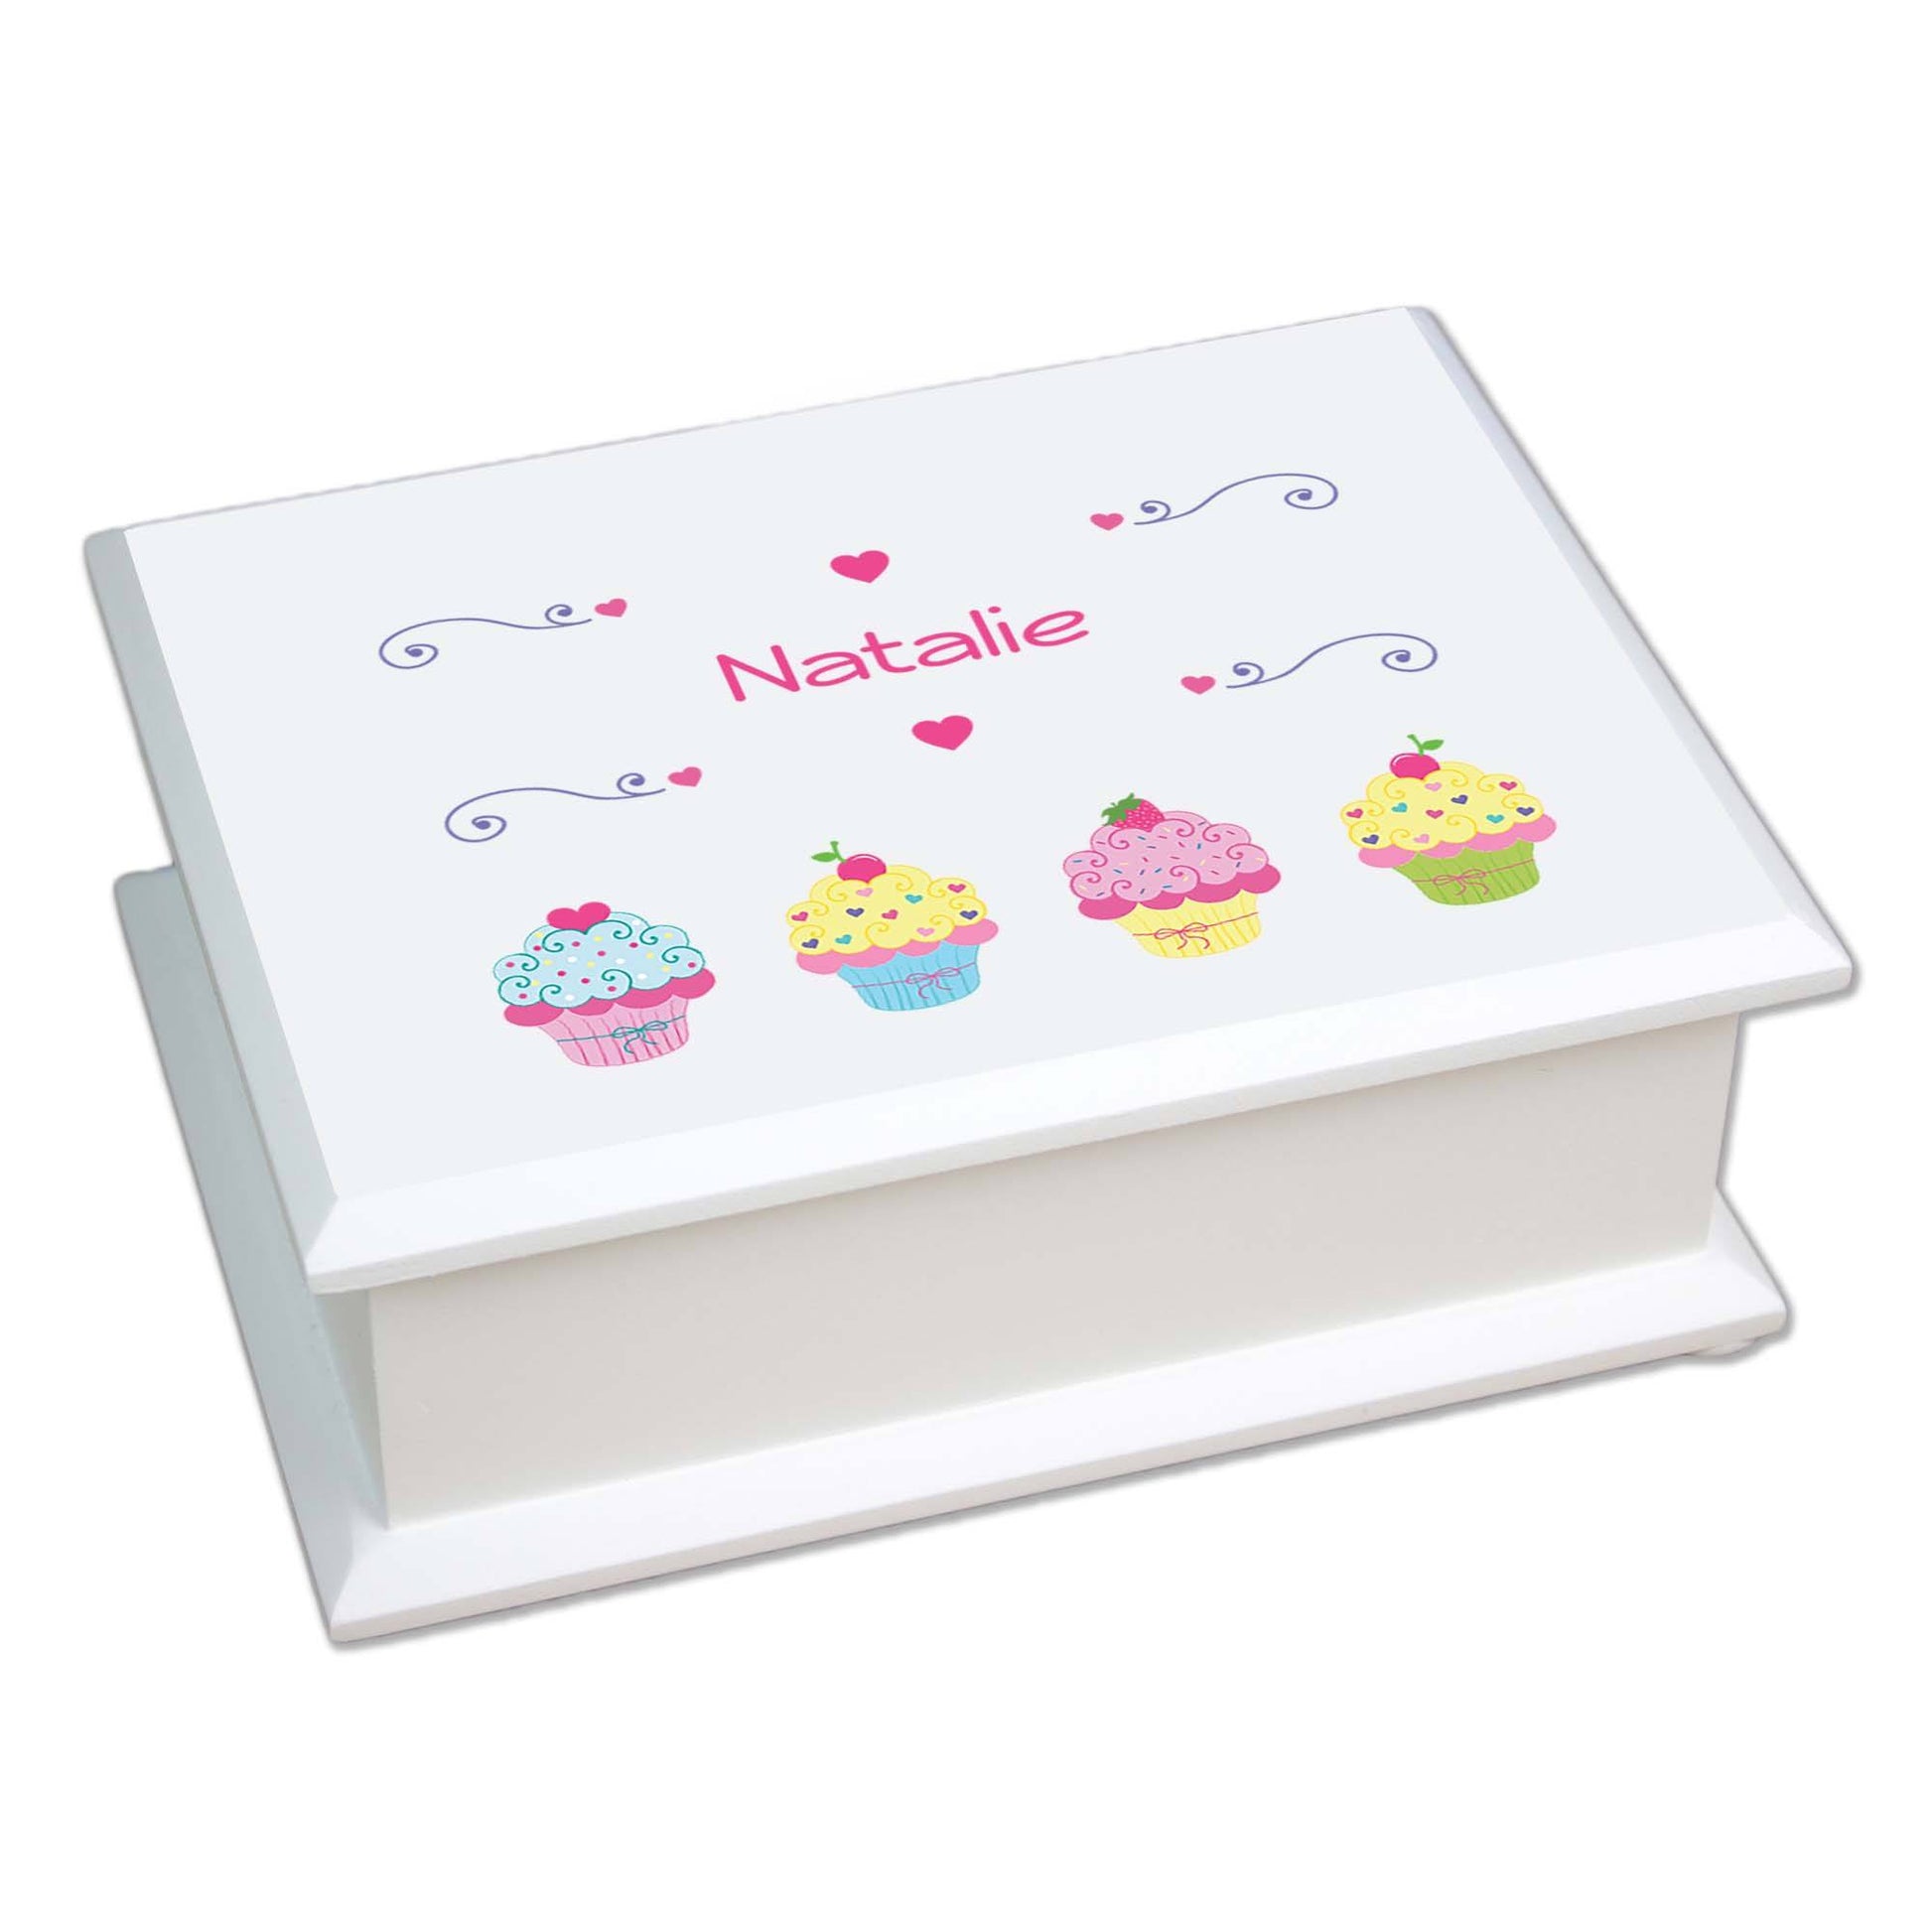 Personalized Lift Top Jewelry Box with Cupcake design